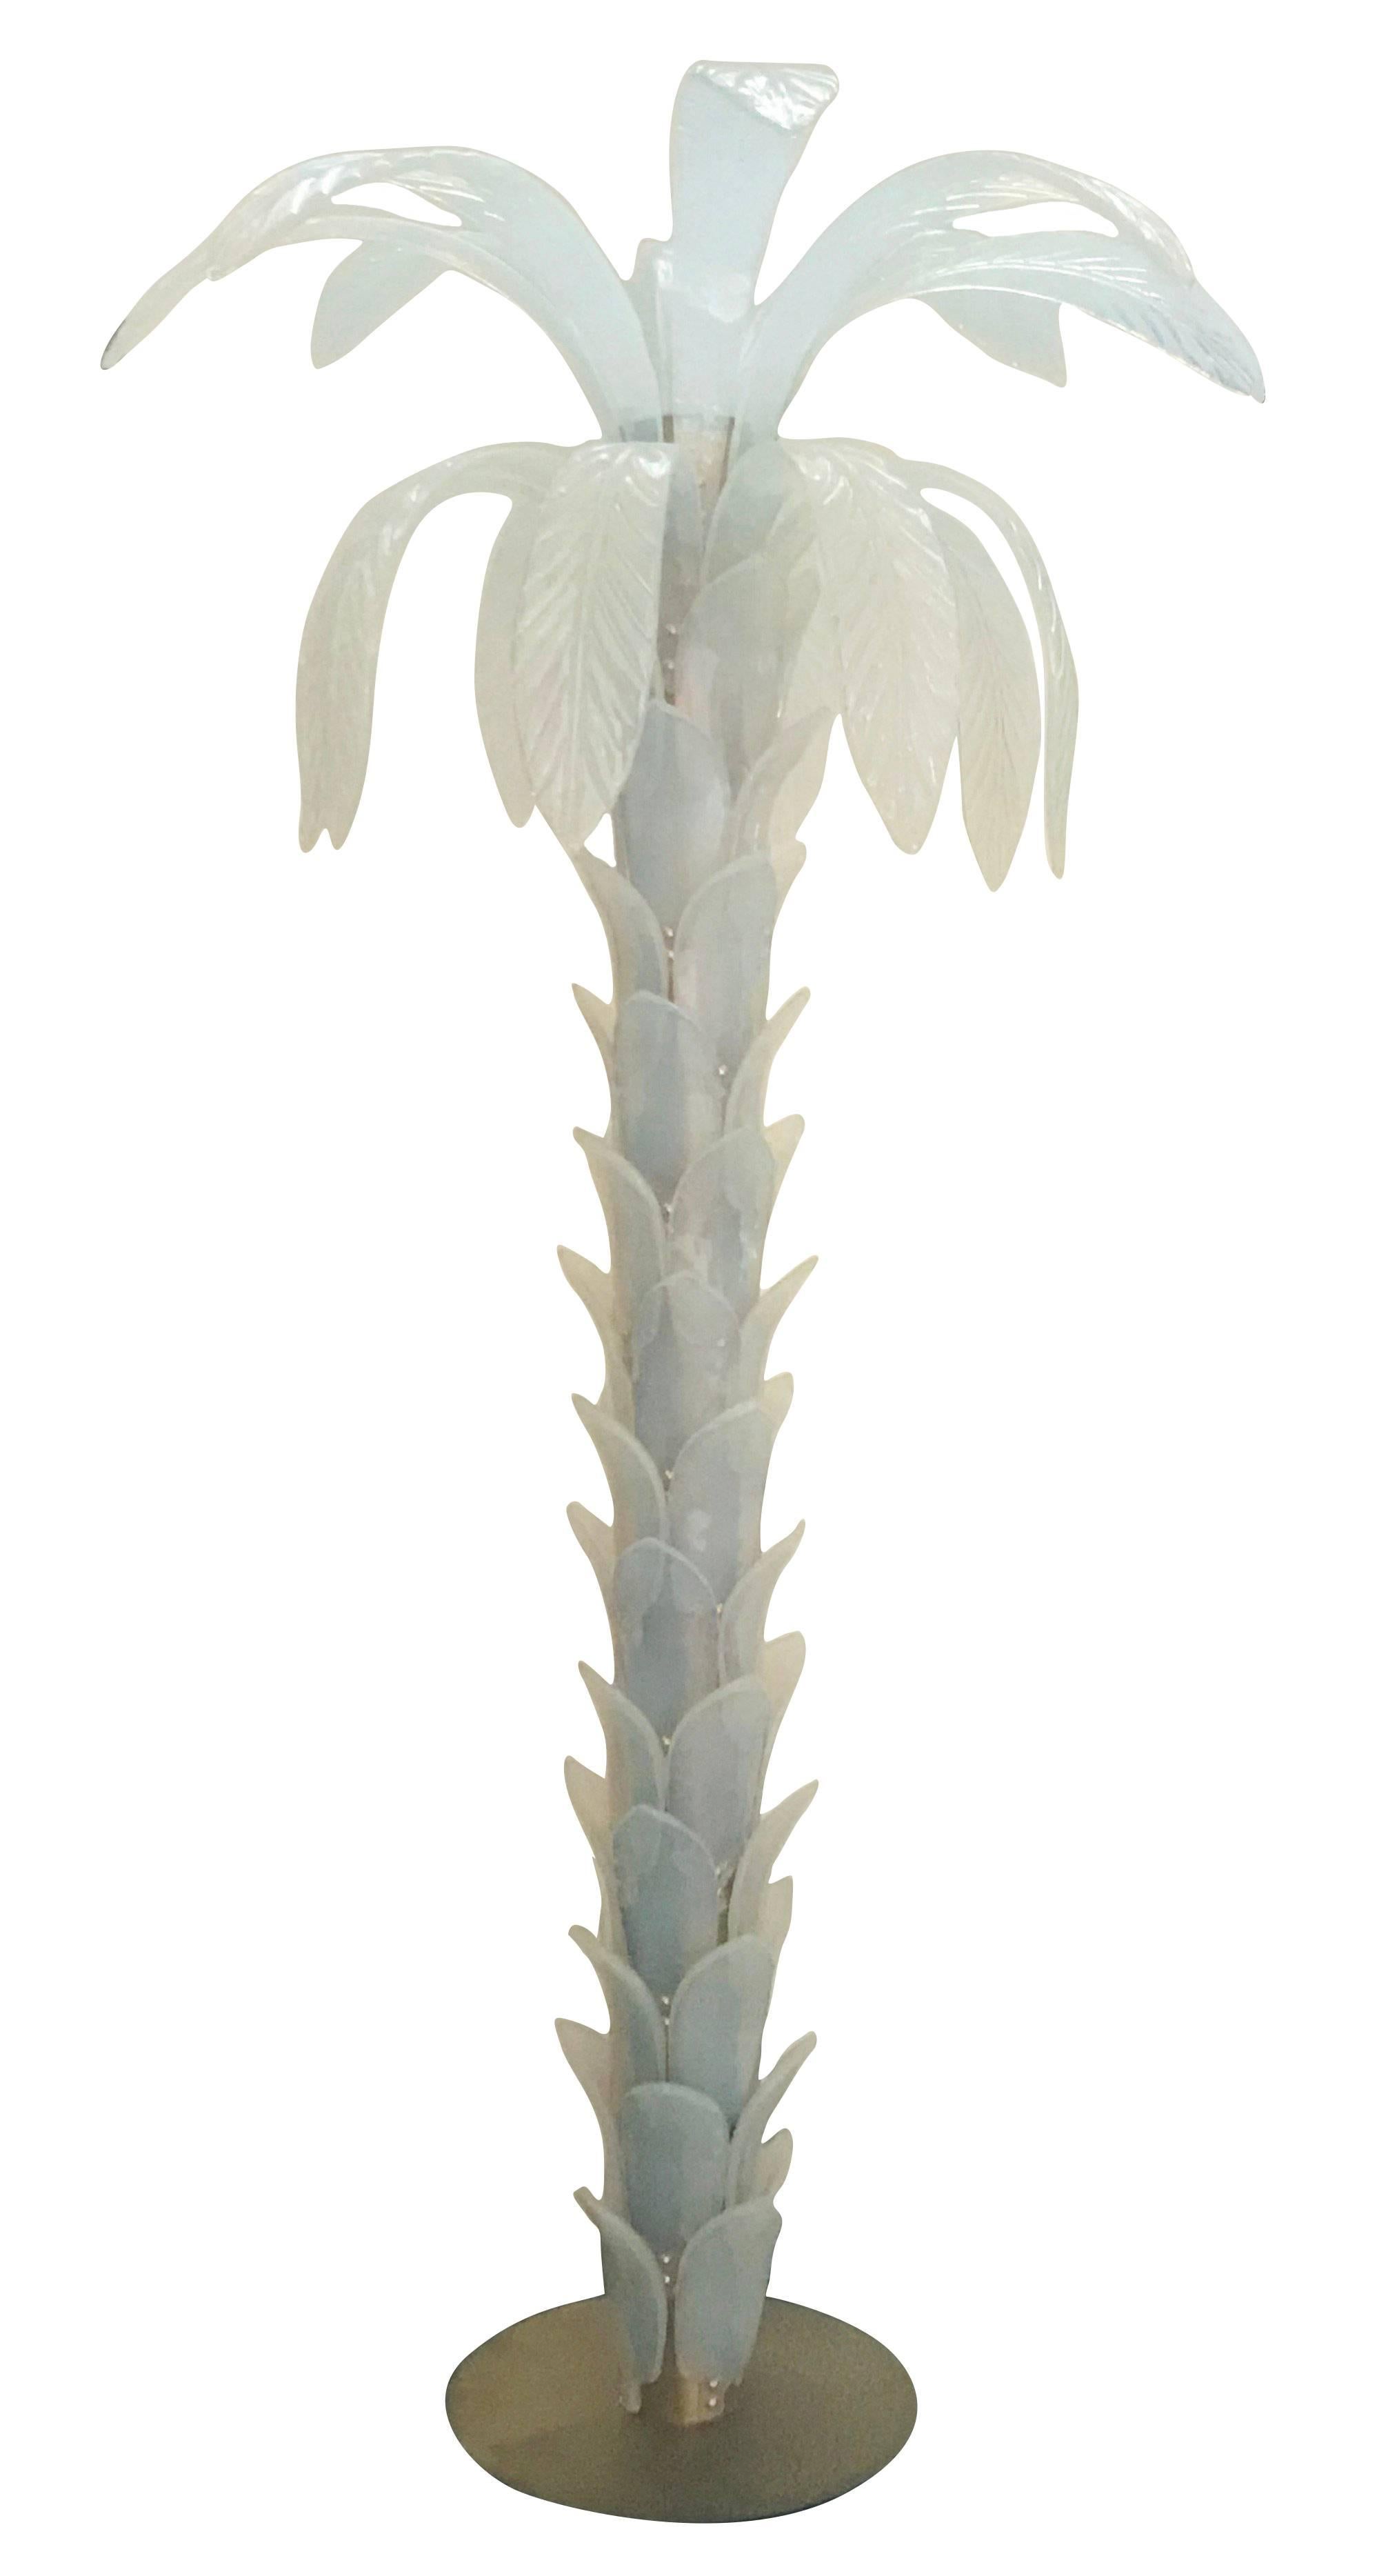 One of a kind and impressive opaline Murano glass palm tree floor lamp.
A pair available in stock in Palm Springs, price is for one item.
Measure: Height 80 inches
Leaves diameter 40 inches
Base diameter 18 inches
One central light socket
Can